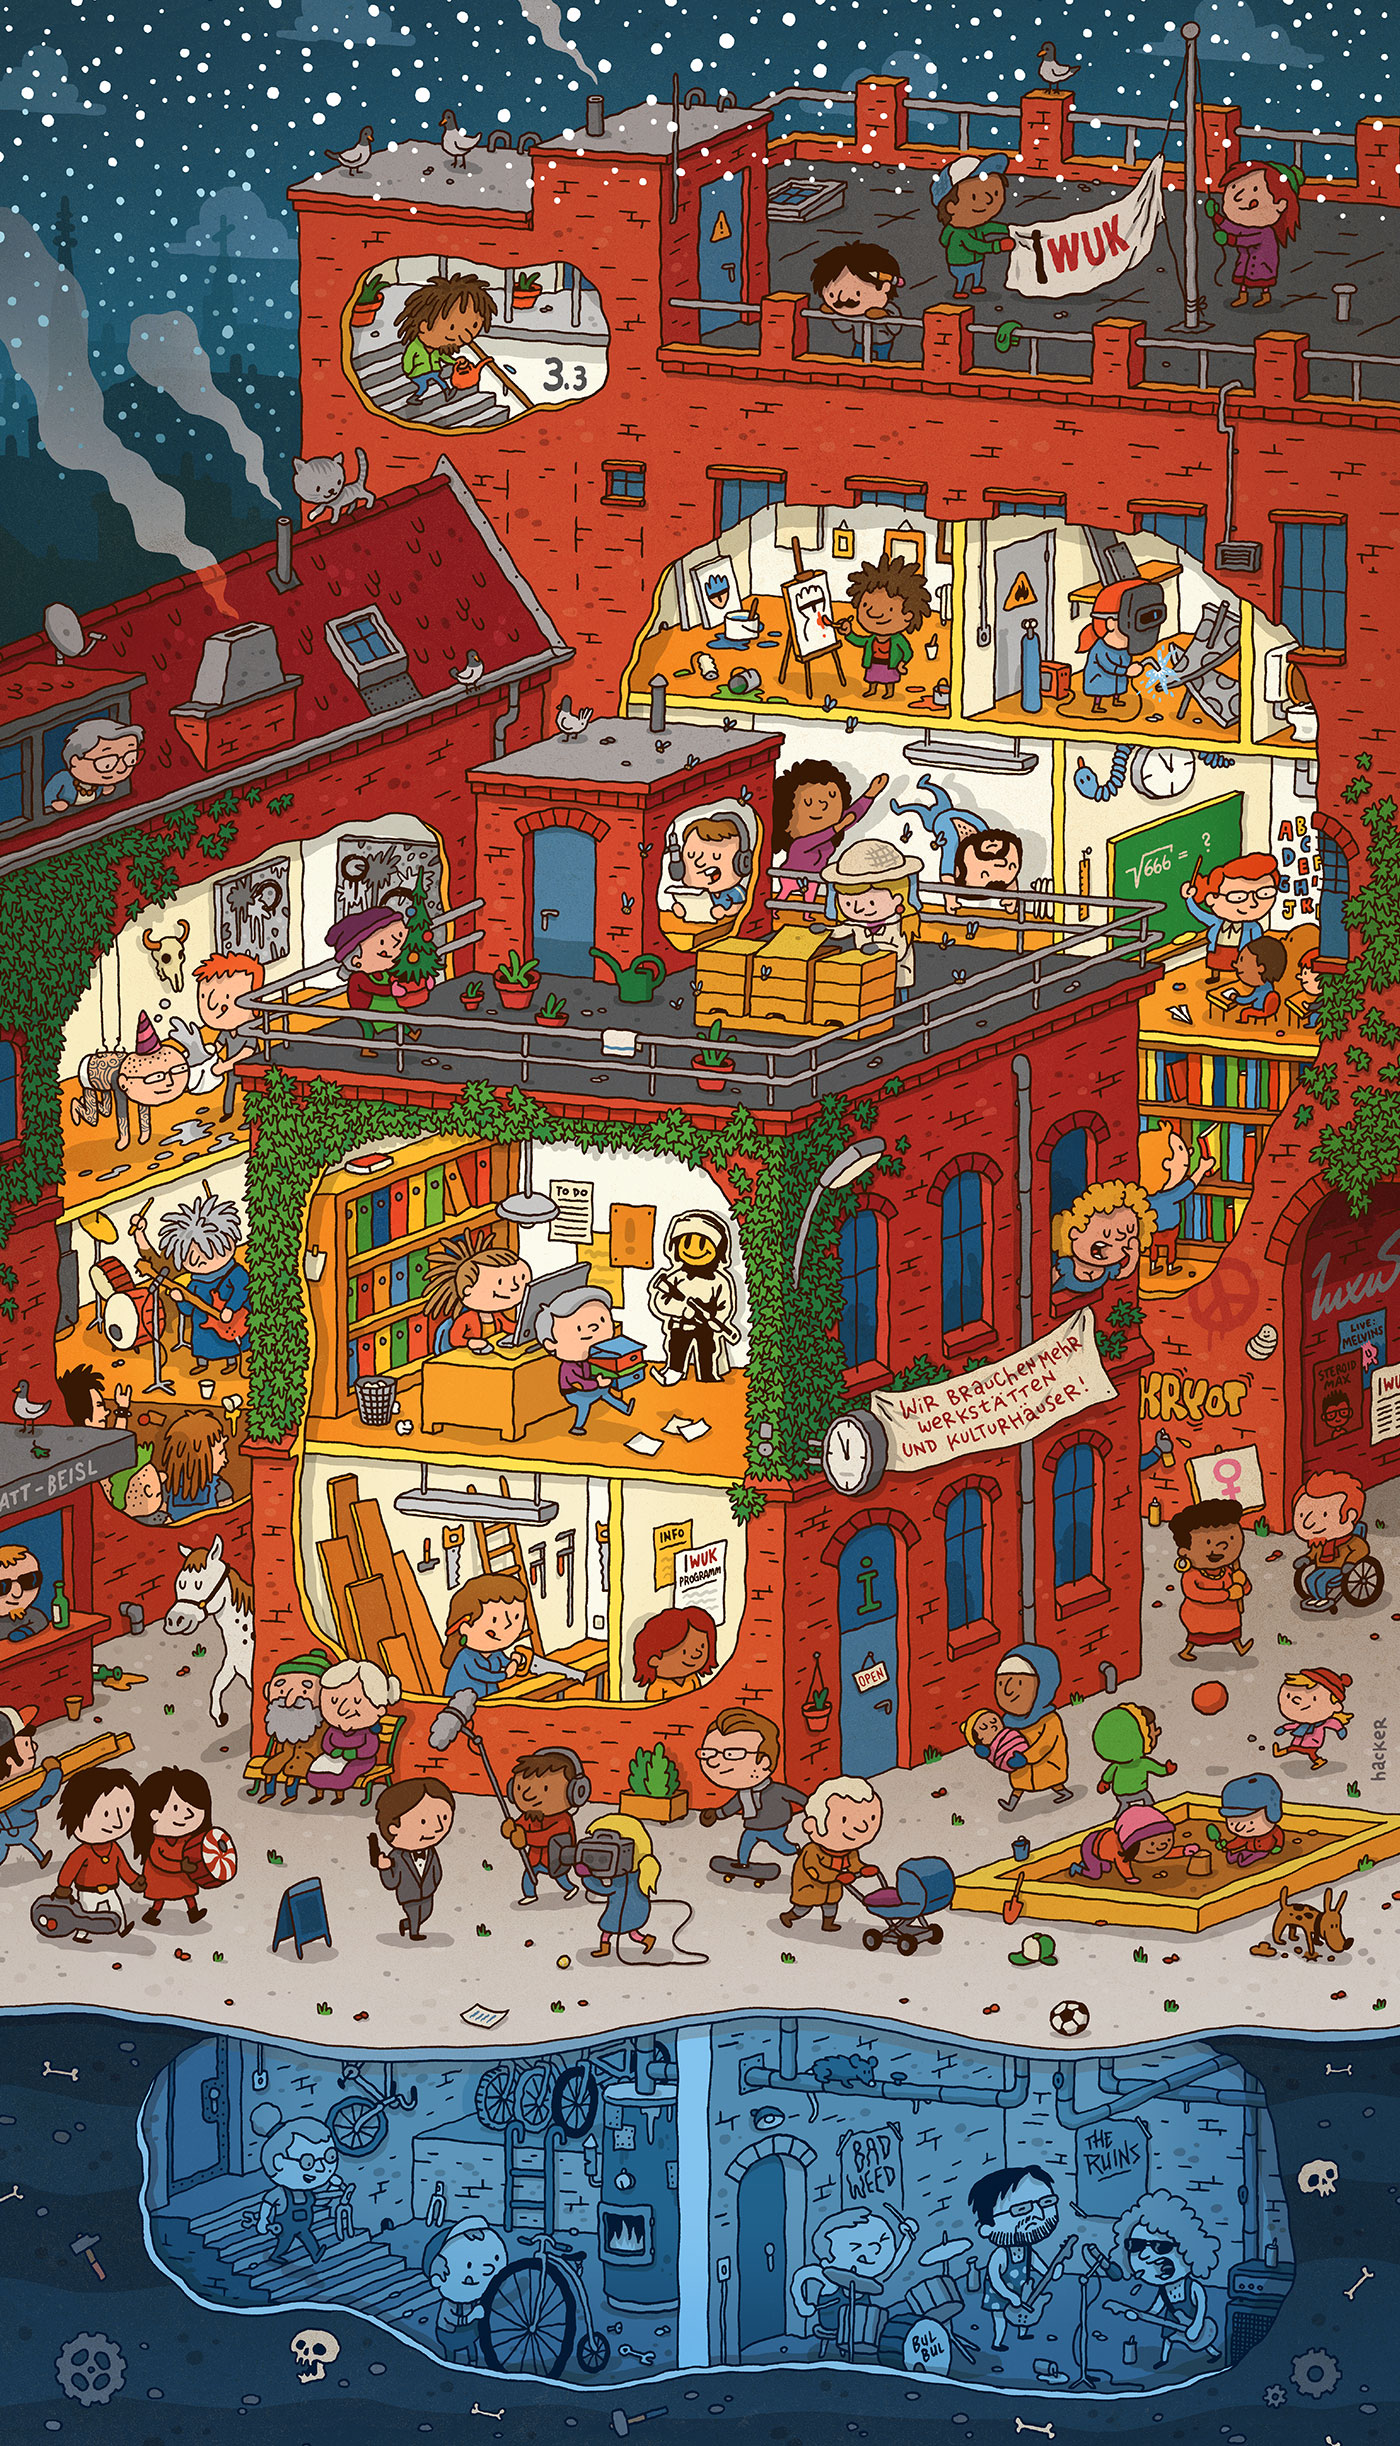 A detailed Wimmelbild illustration for WUK Vienna by Michael Hacker featuring White Stripes, The Melvins, King Buzzo, Banksy, Bul Bul, Fuckhead, Stirn Prumzer, James Bond and Pipi Langstrumpf's horse.